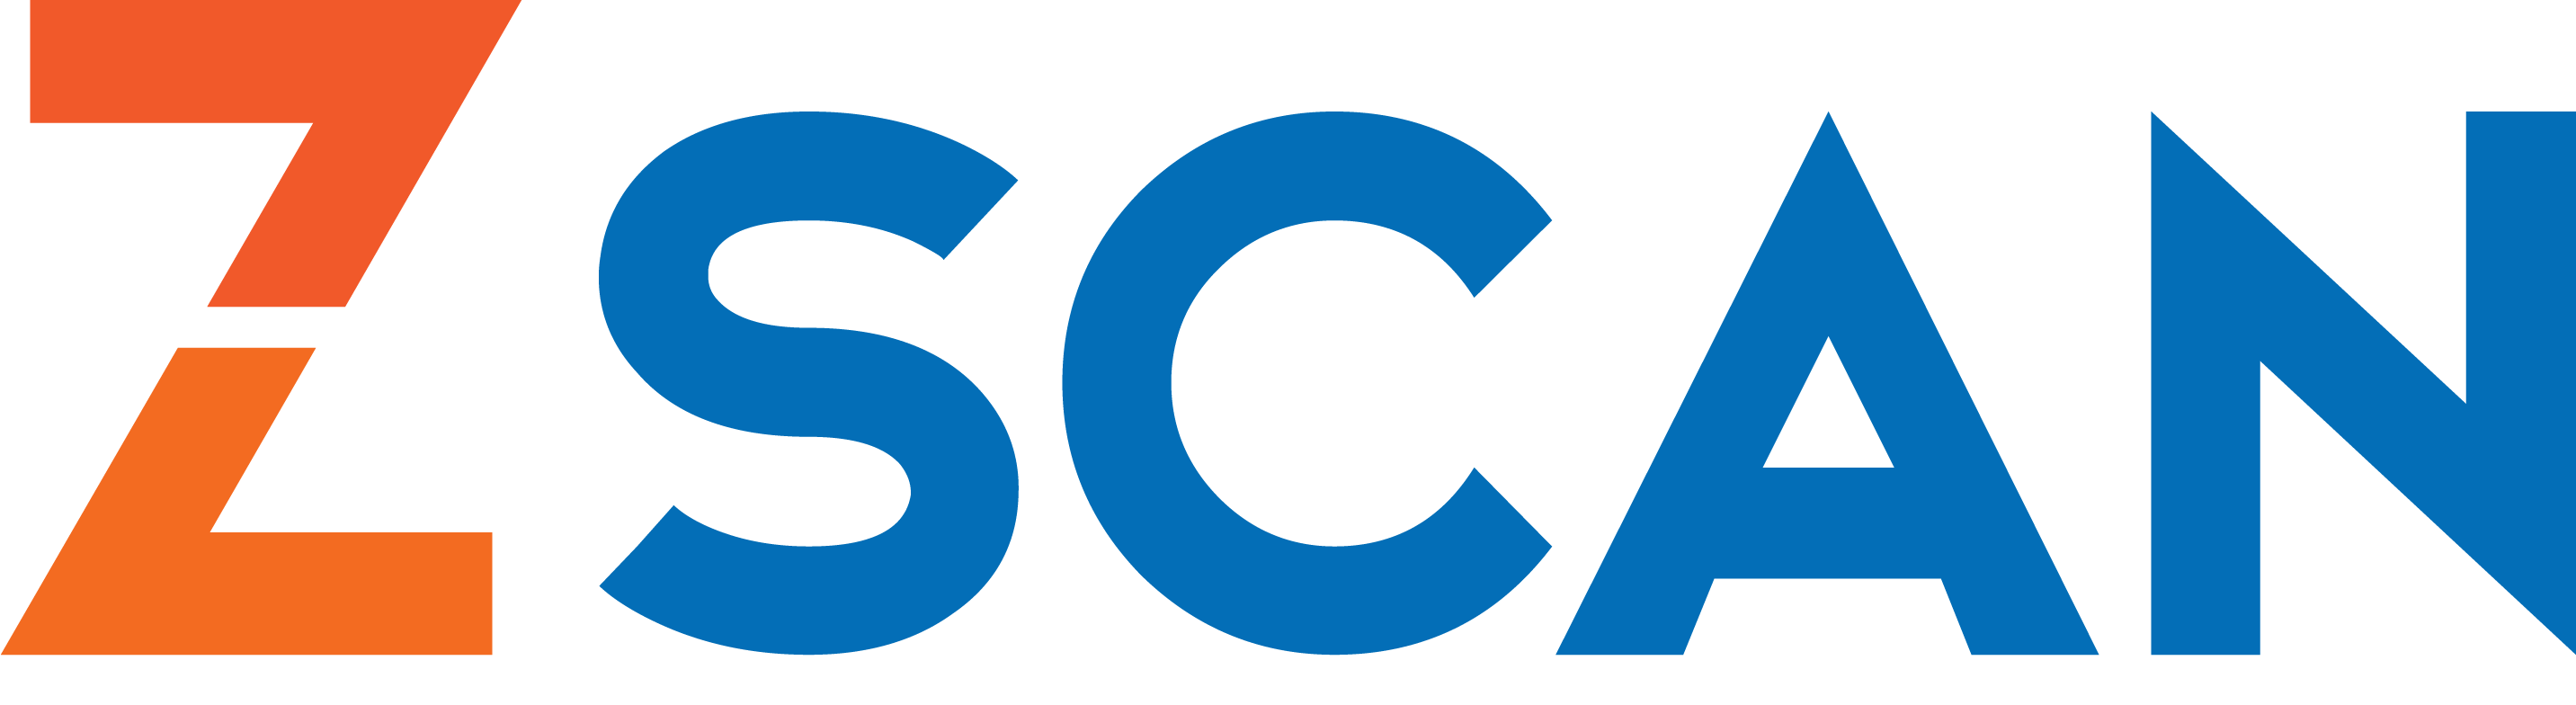 Zscan Software SAC